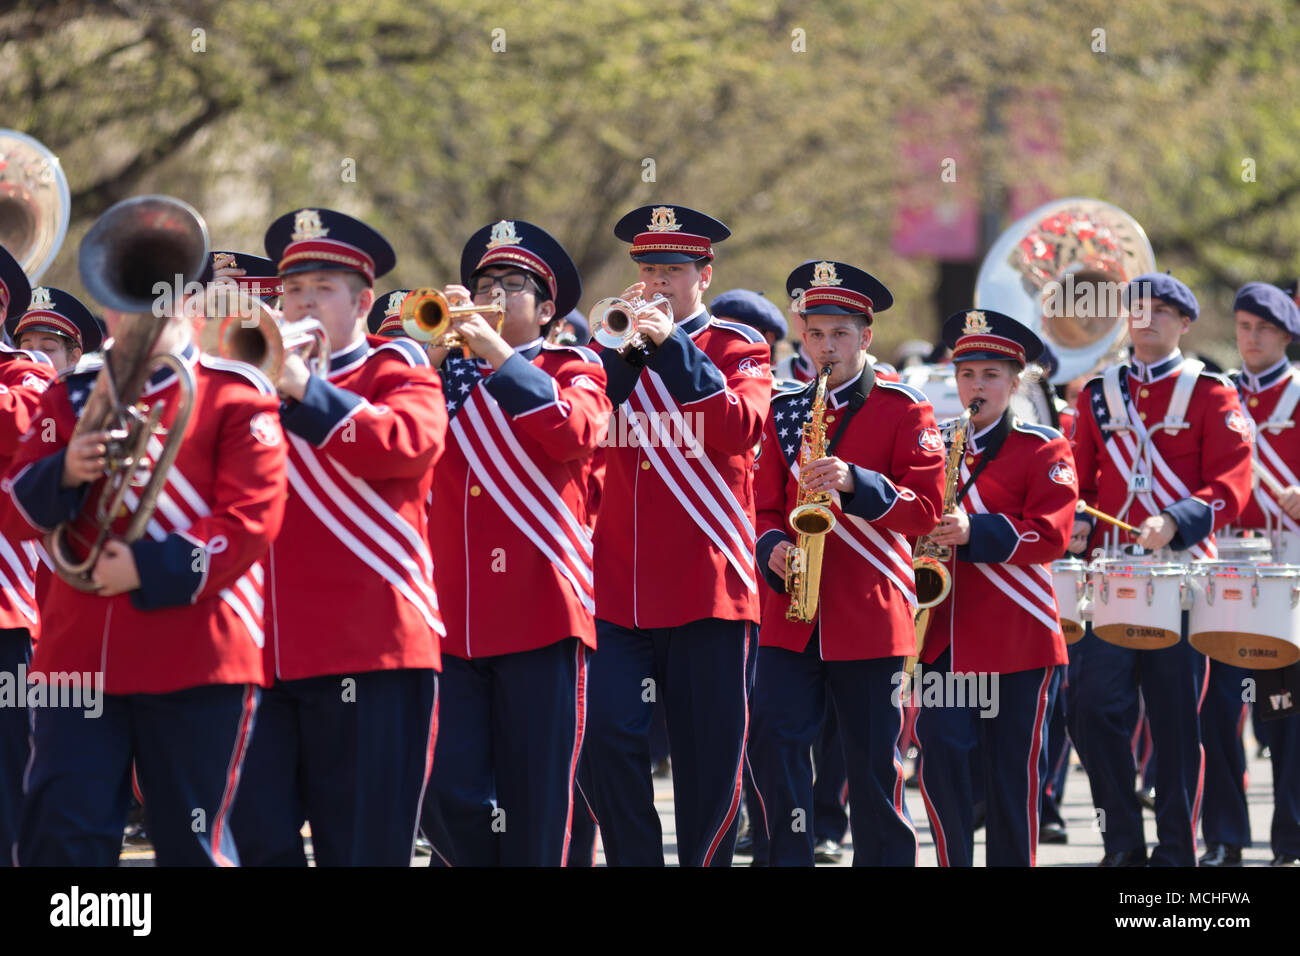 Washington, D.C., USA - April 14, 2018 Austintown Fitch High School Marching Band in the 2018 National Cherry Blossom Parade Stock Photo